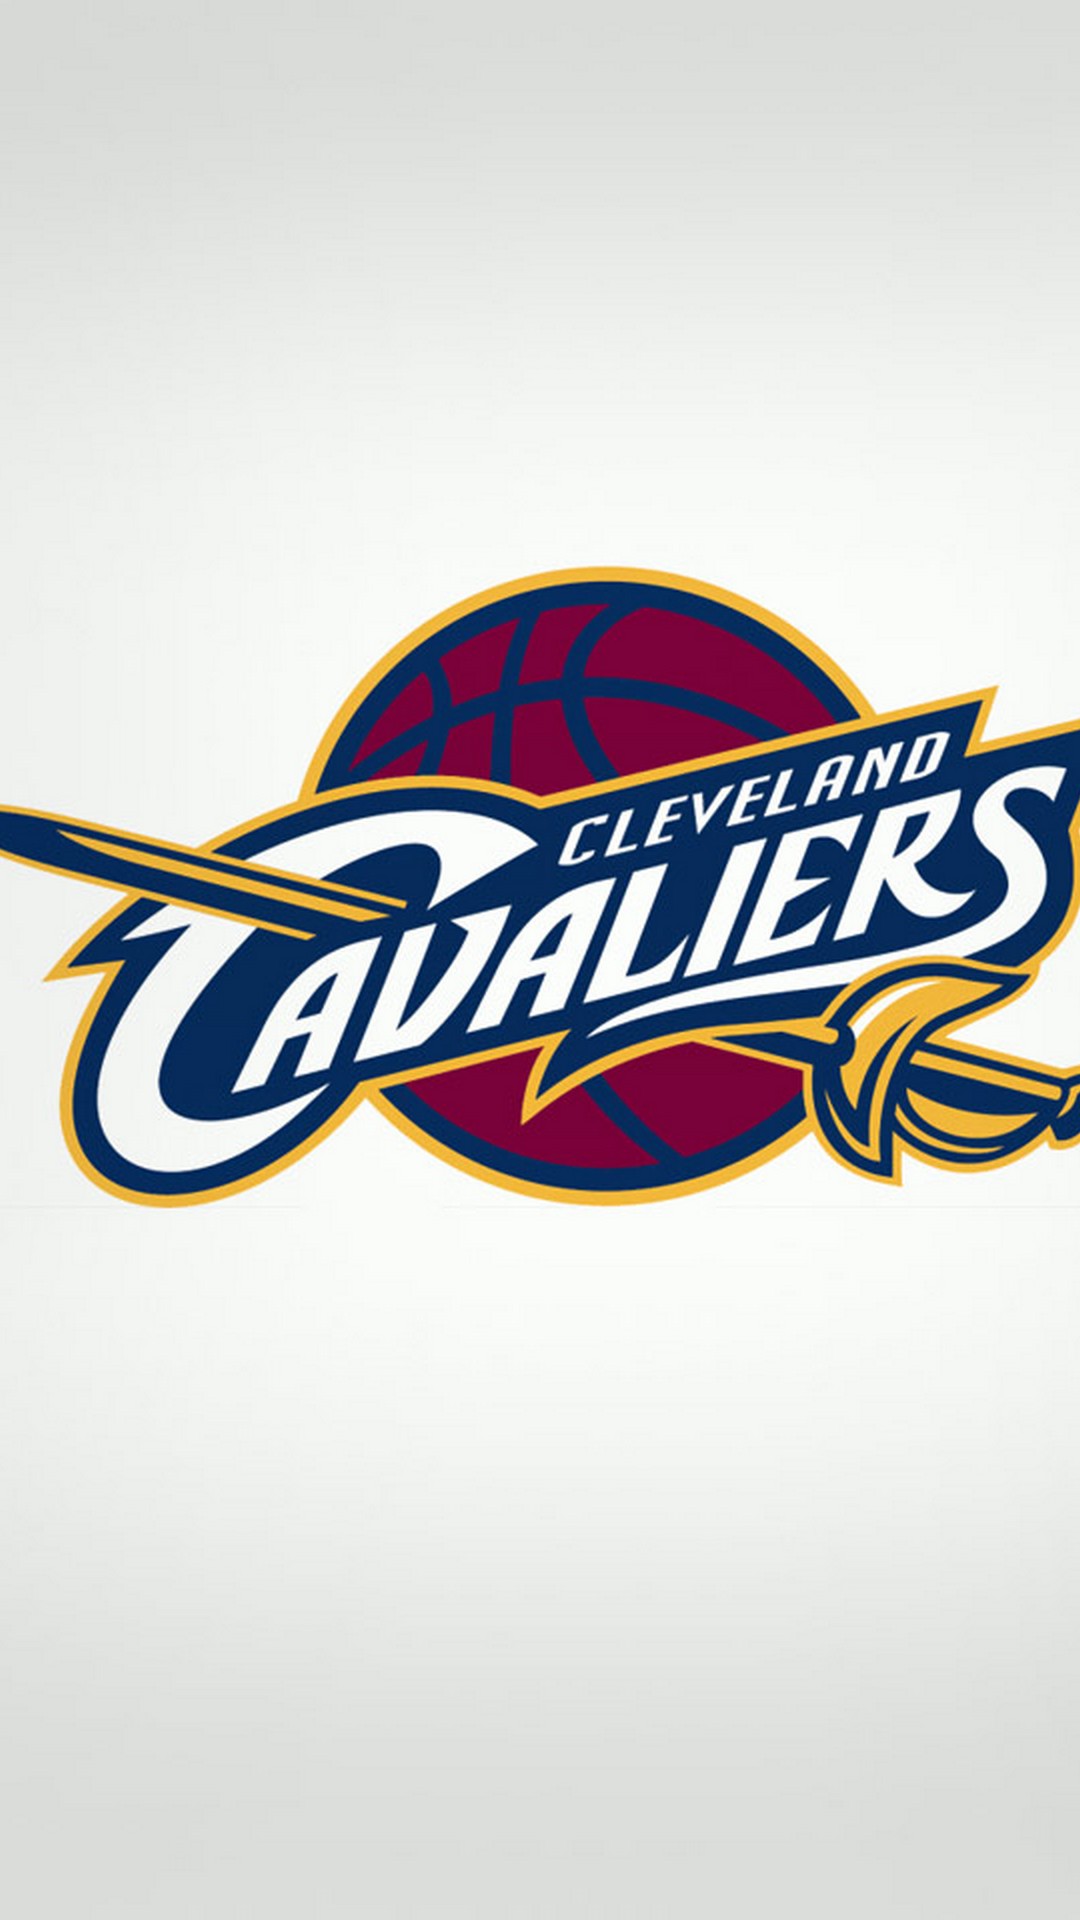 Wallpaper Cleveland Cavaliers iphone resolution 1080x1920